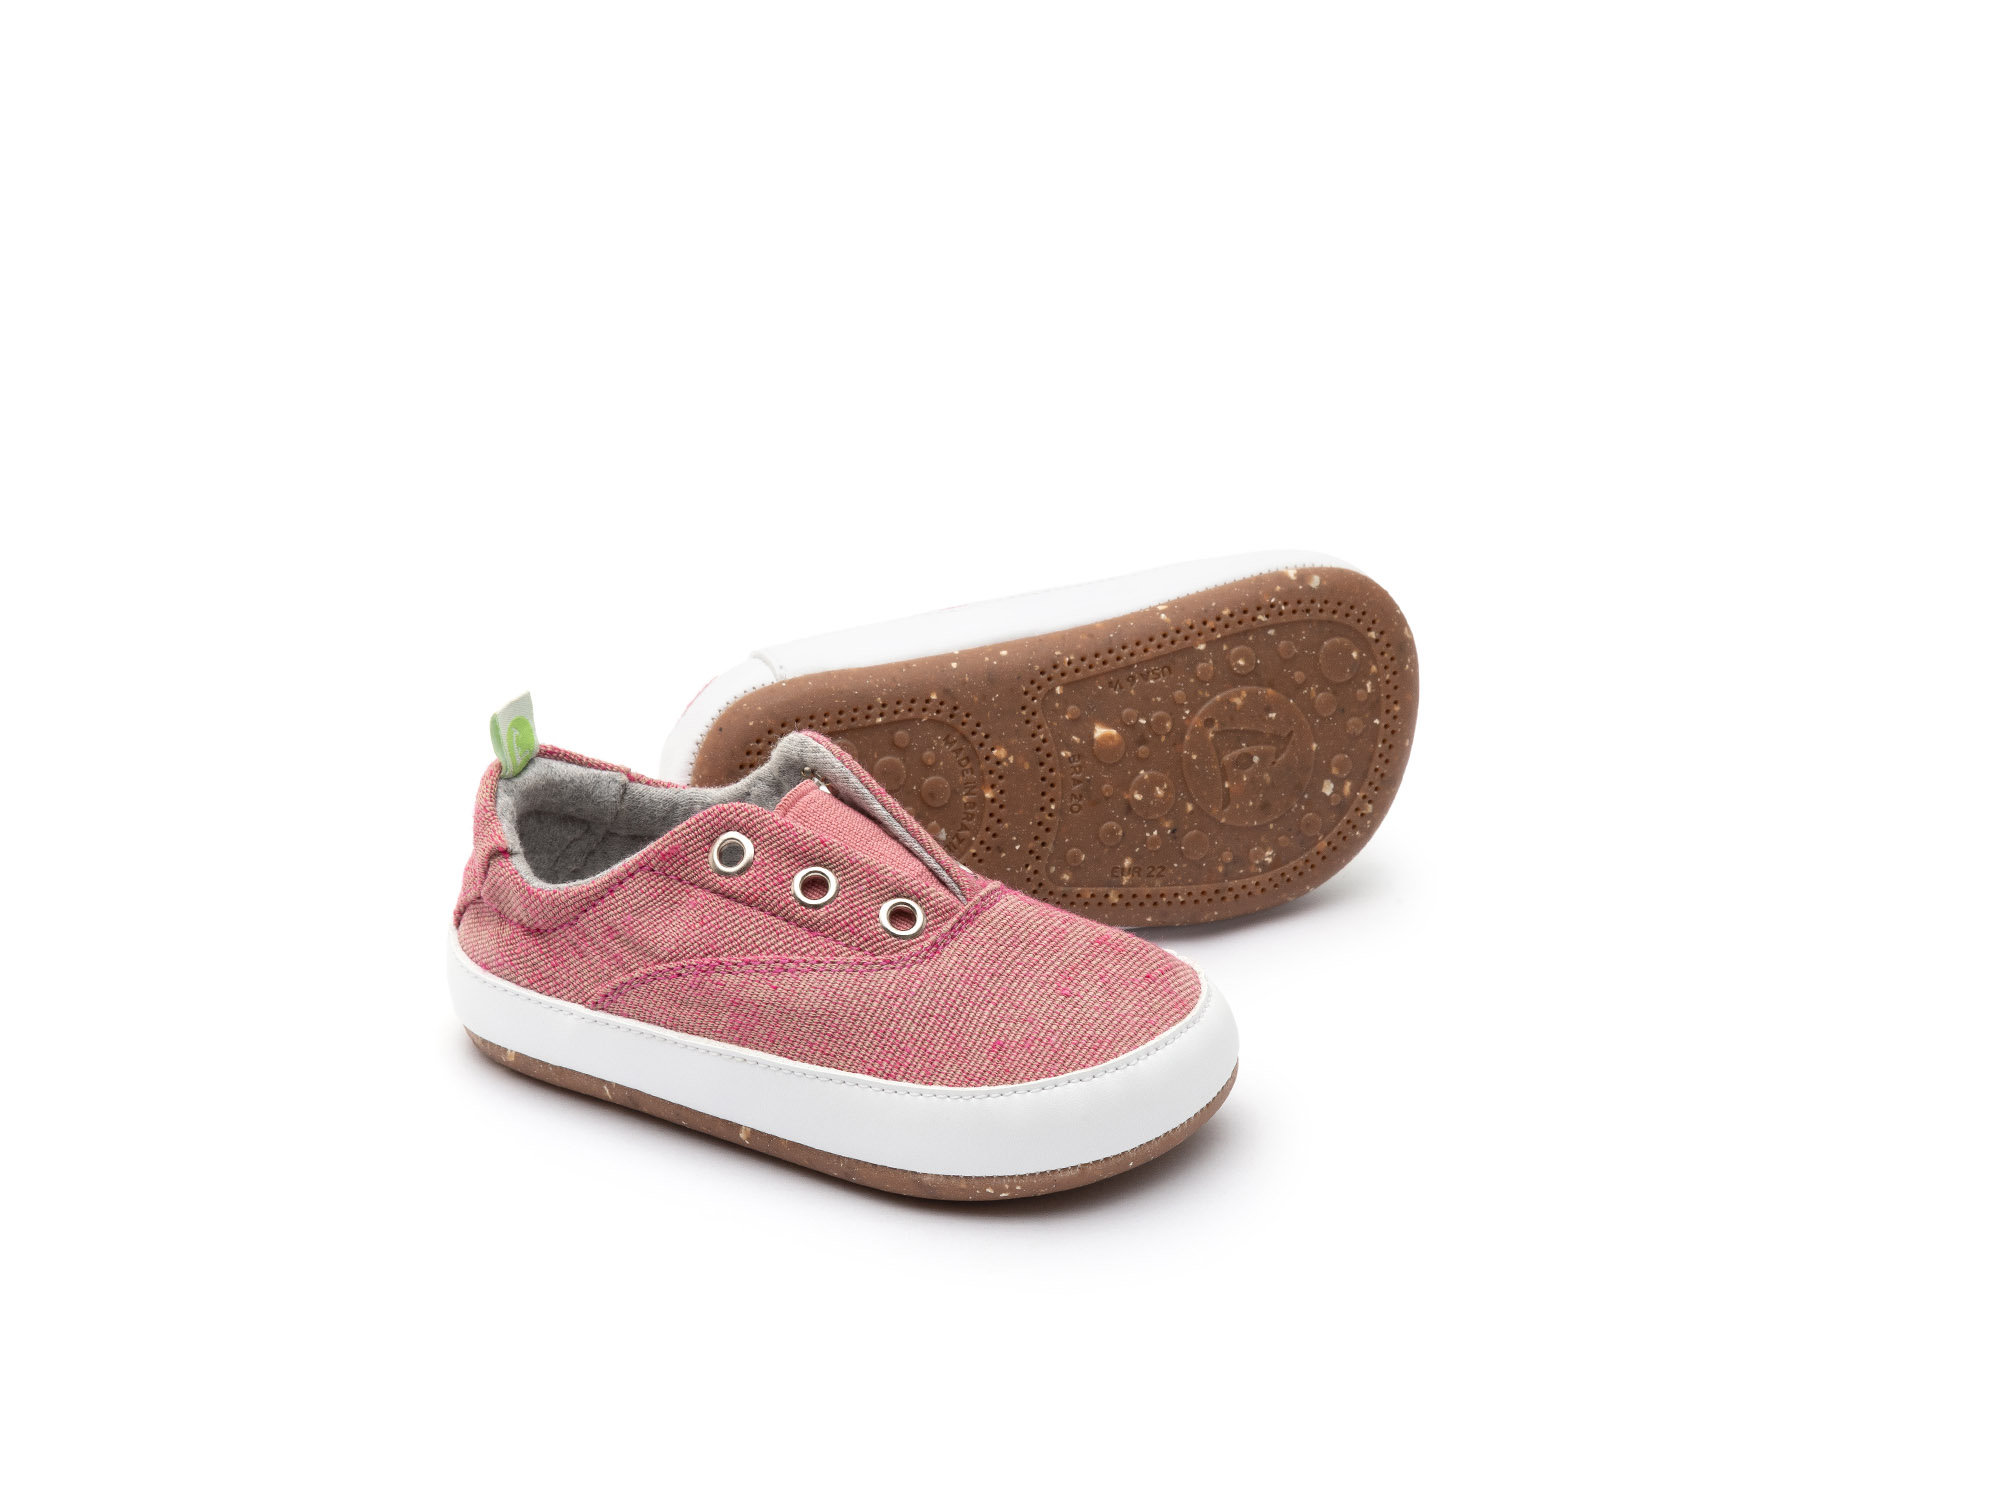 UP & GO Sneakers for Girls Spicey Green | Tip Toey Joey - Australia - 0